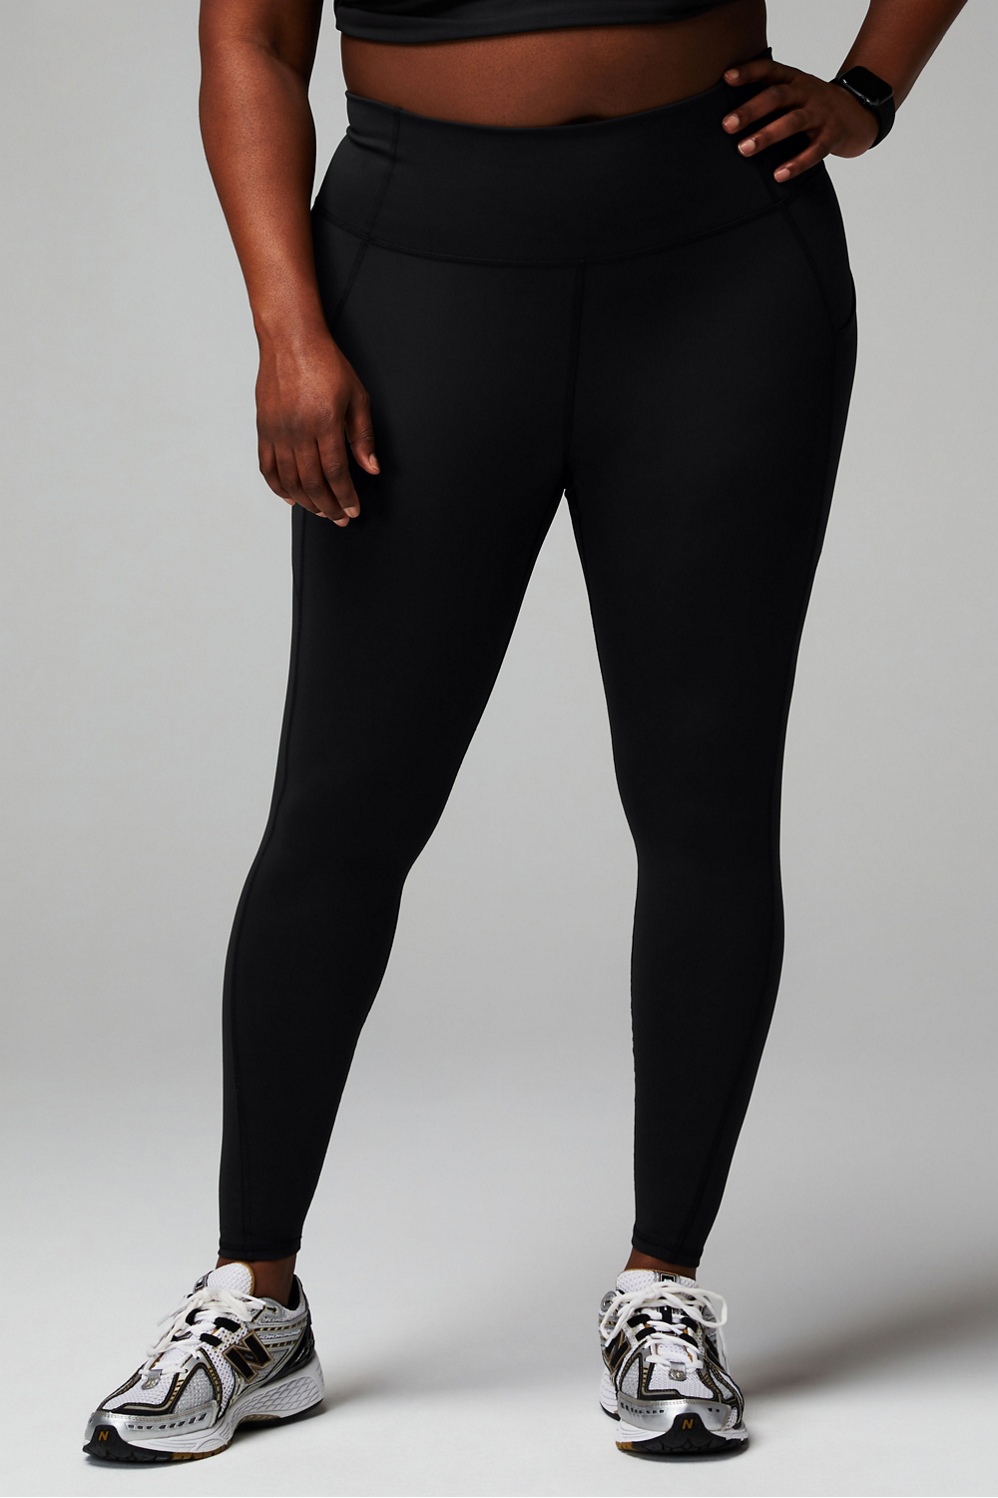  Fabletics Women's Oasis PureLuxe High-Waisted 7/8 Legging,  Workout, Yoga, Light Compression, Buttery Soft, XXS, Black : Clothing,  Shoes & Jewelry